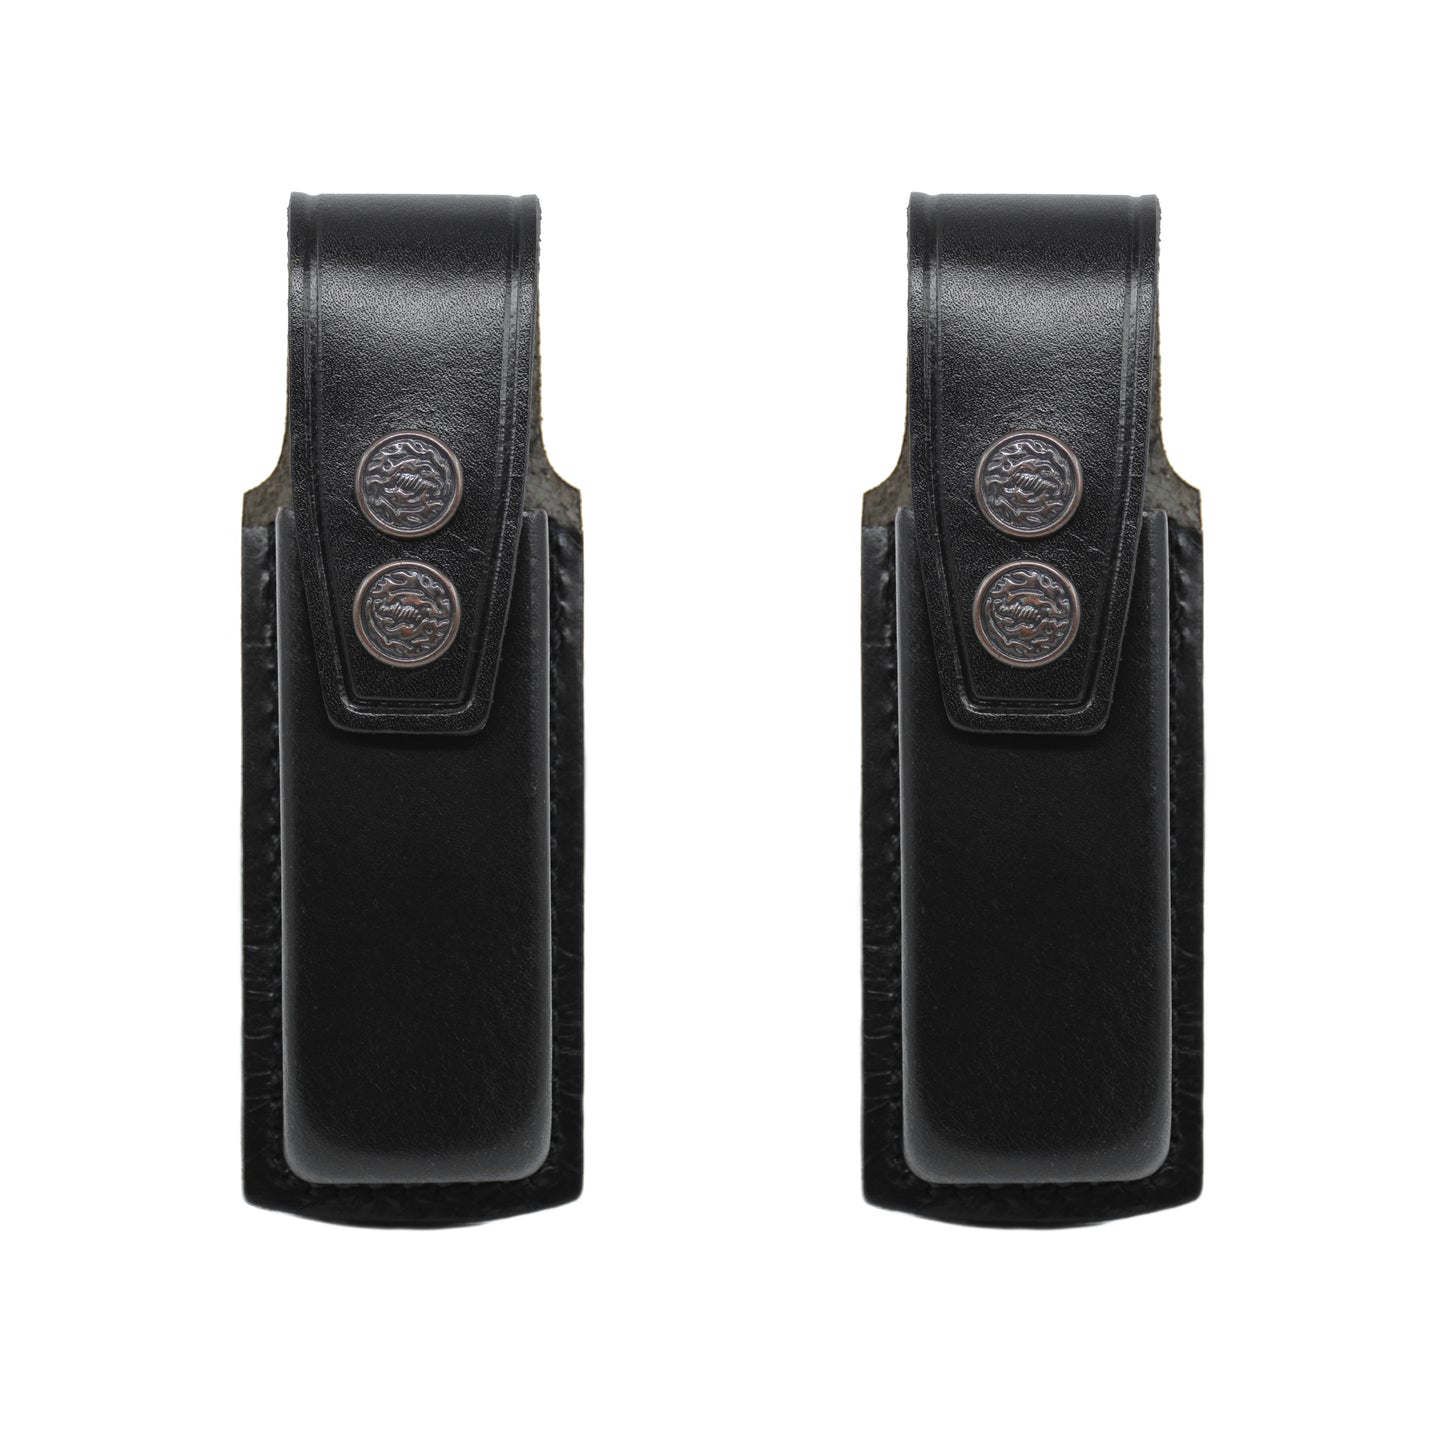 Holster ALS2090 Two Single Leather Magazine Pouches for Glock 17 19 22 23 Handmade!